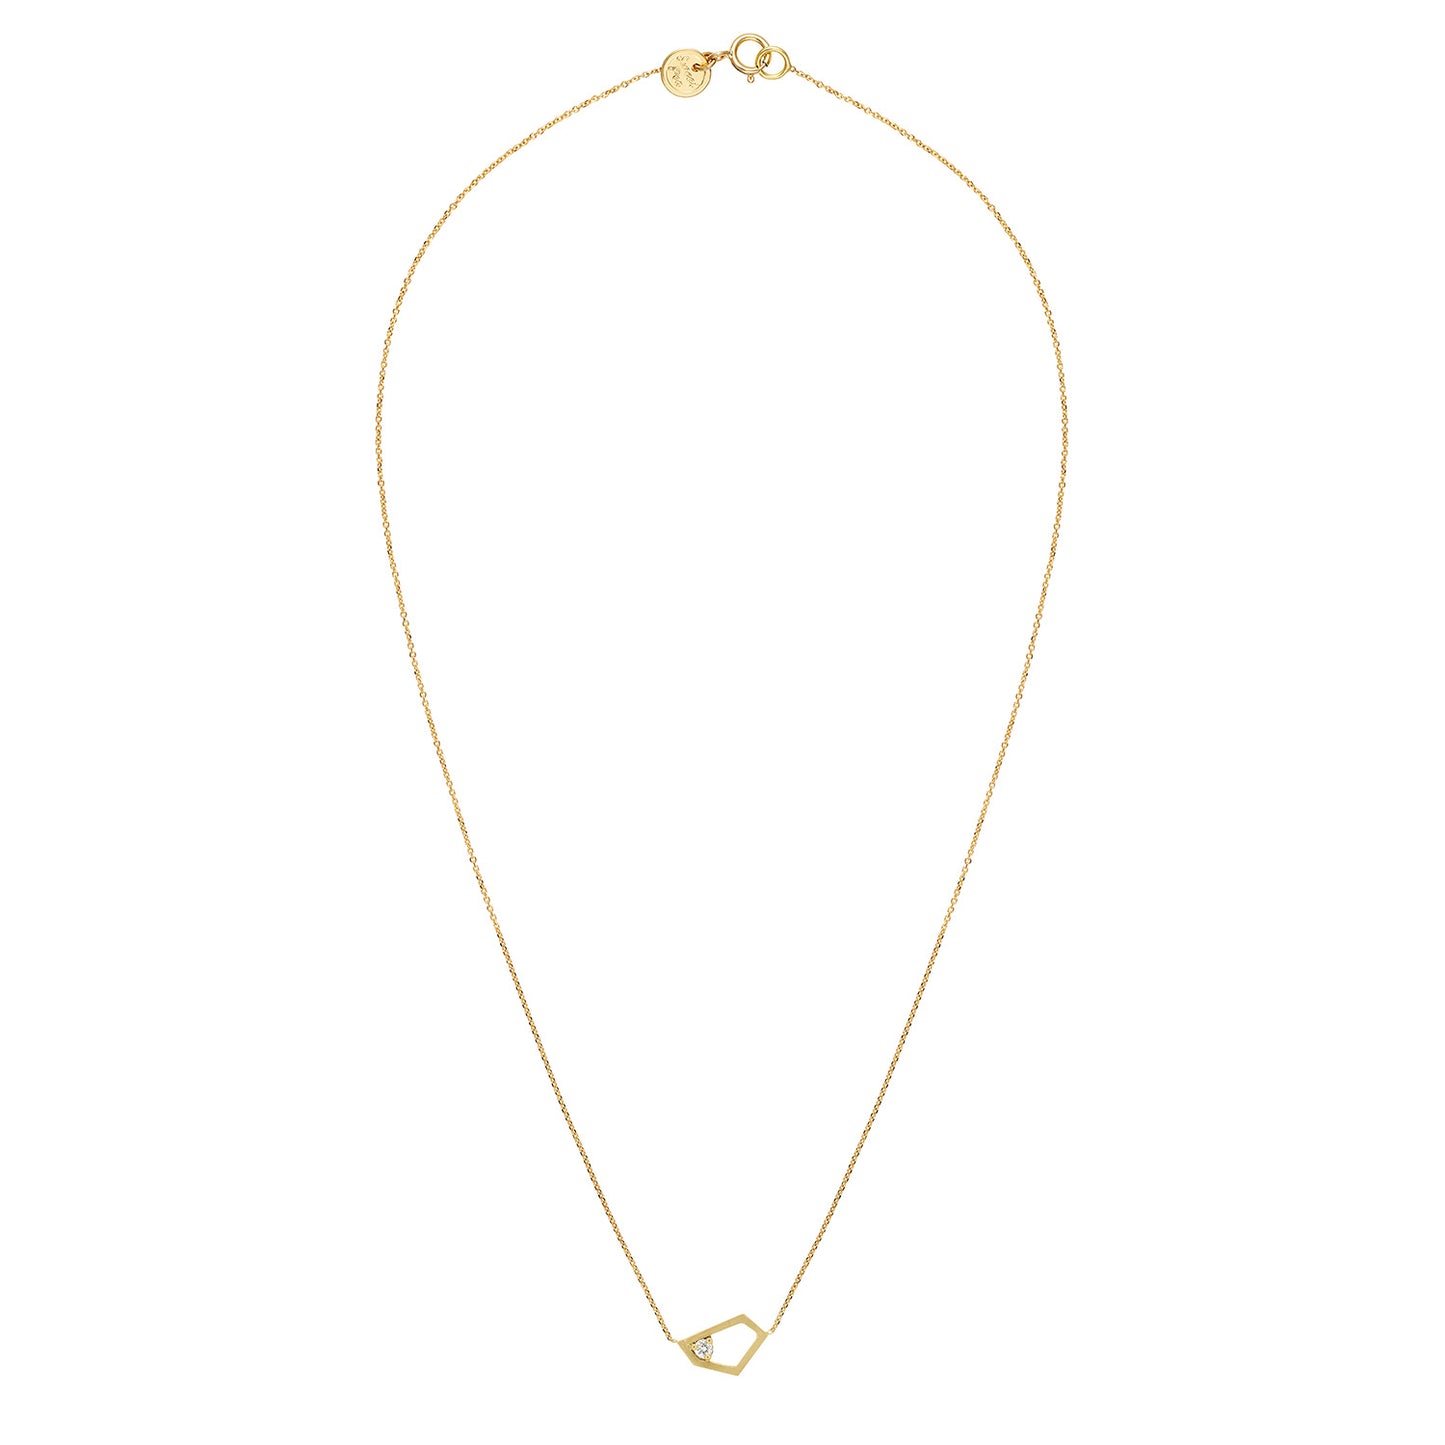 18ct yellow gold fine chain necklace with inserted open geometric shape in brushed finish and claw set white diamond